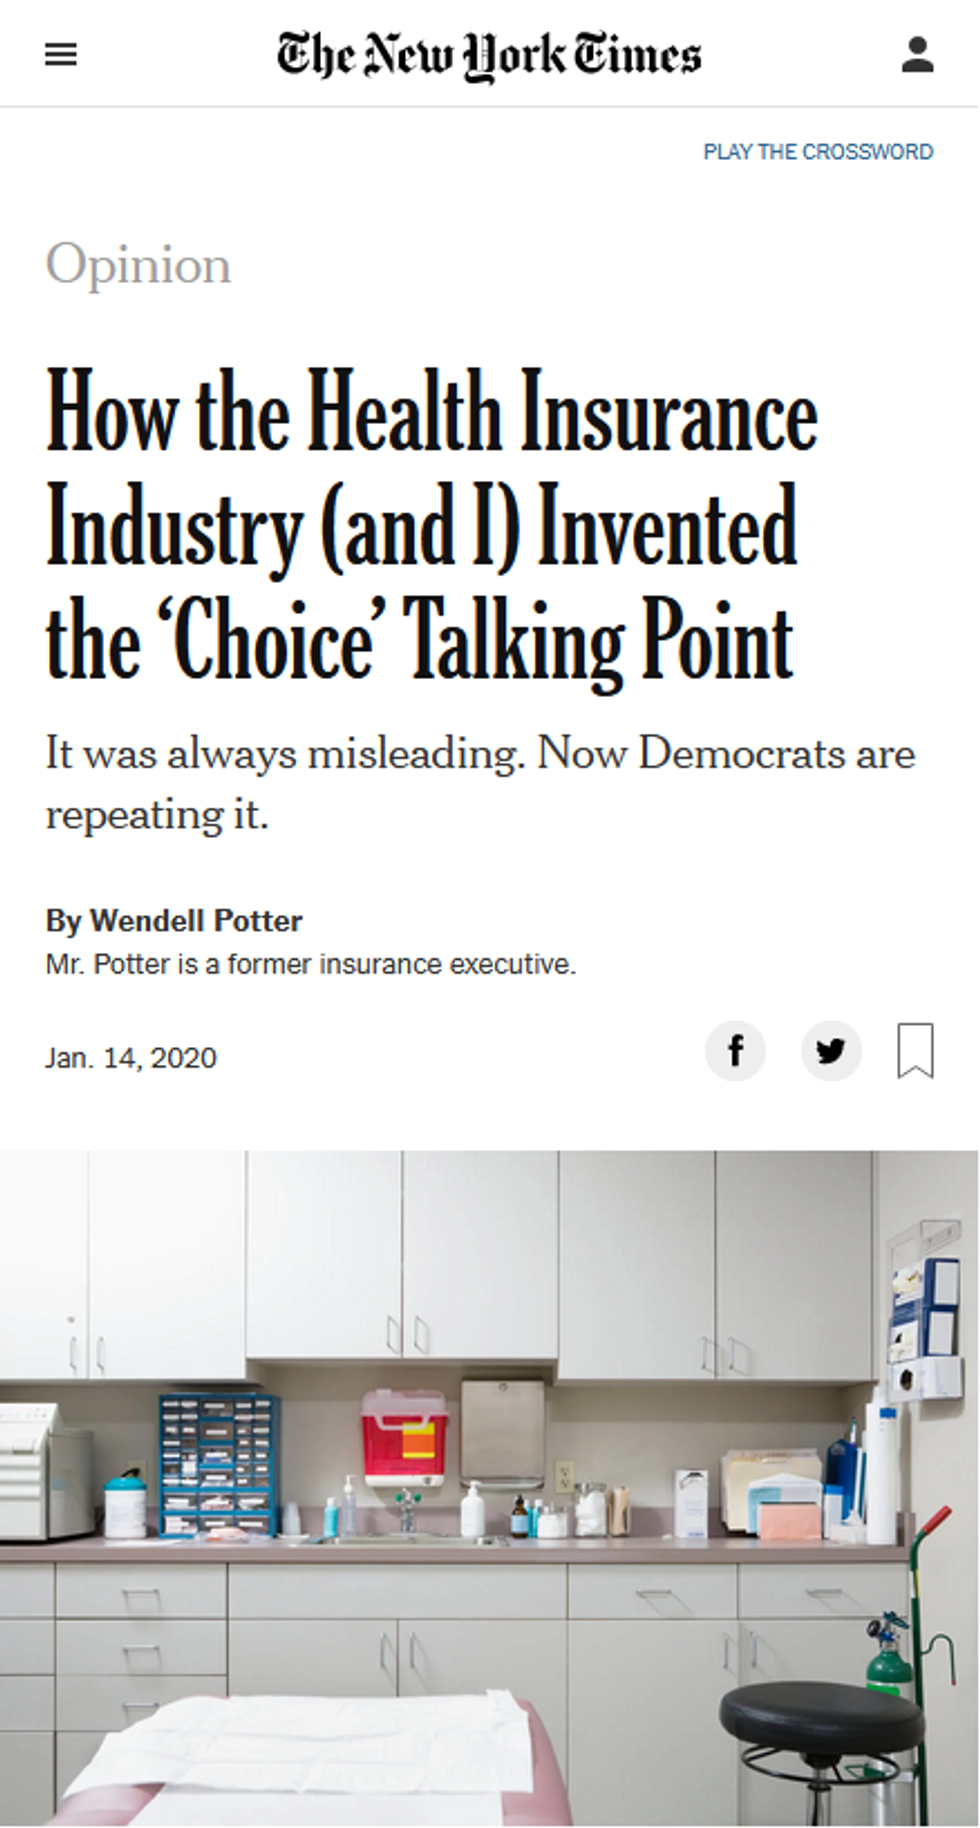 NYT: How the Health Insurance Industry (and I) Invented the 'Choice' Talking Point